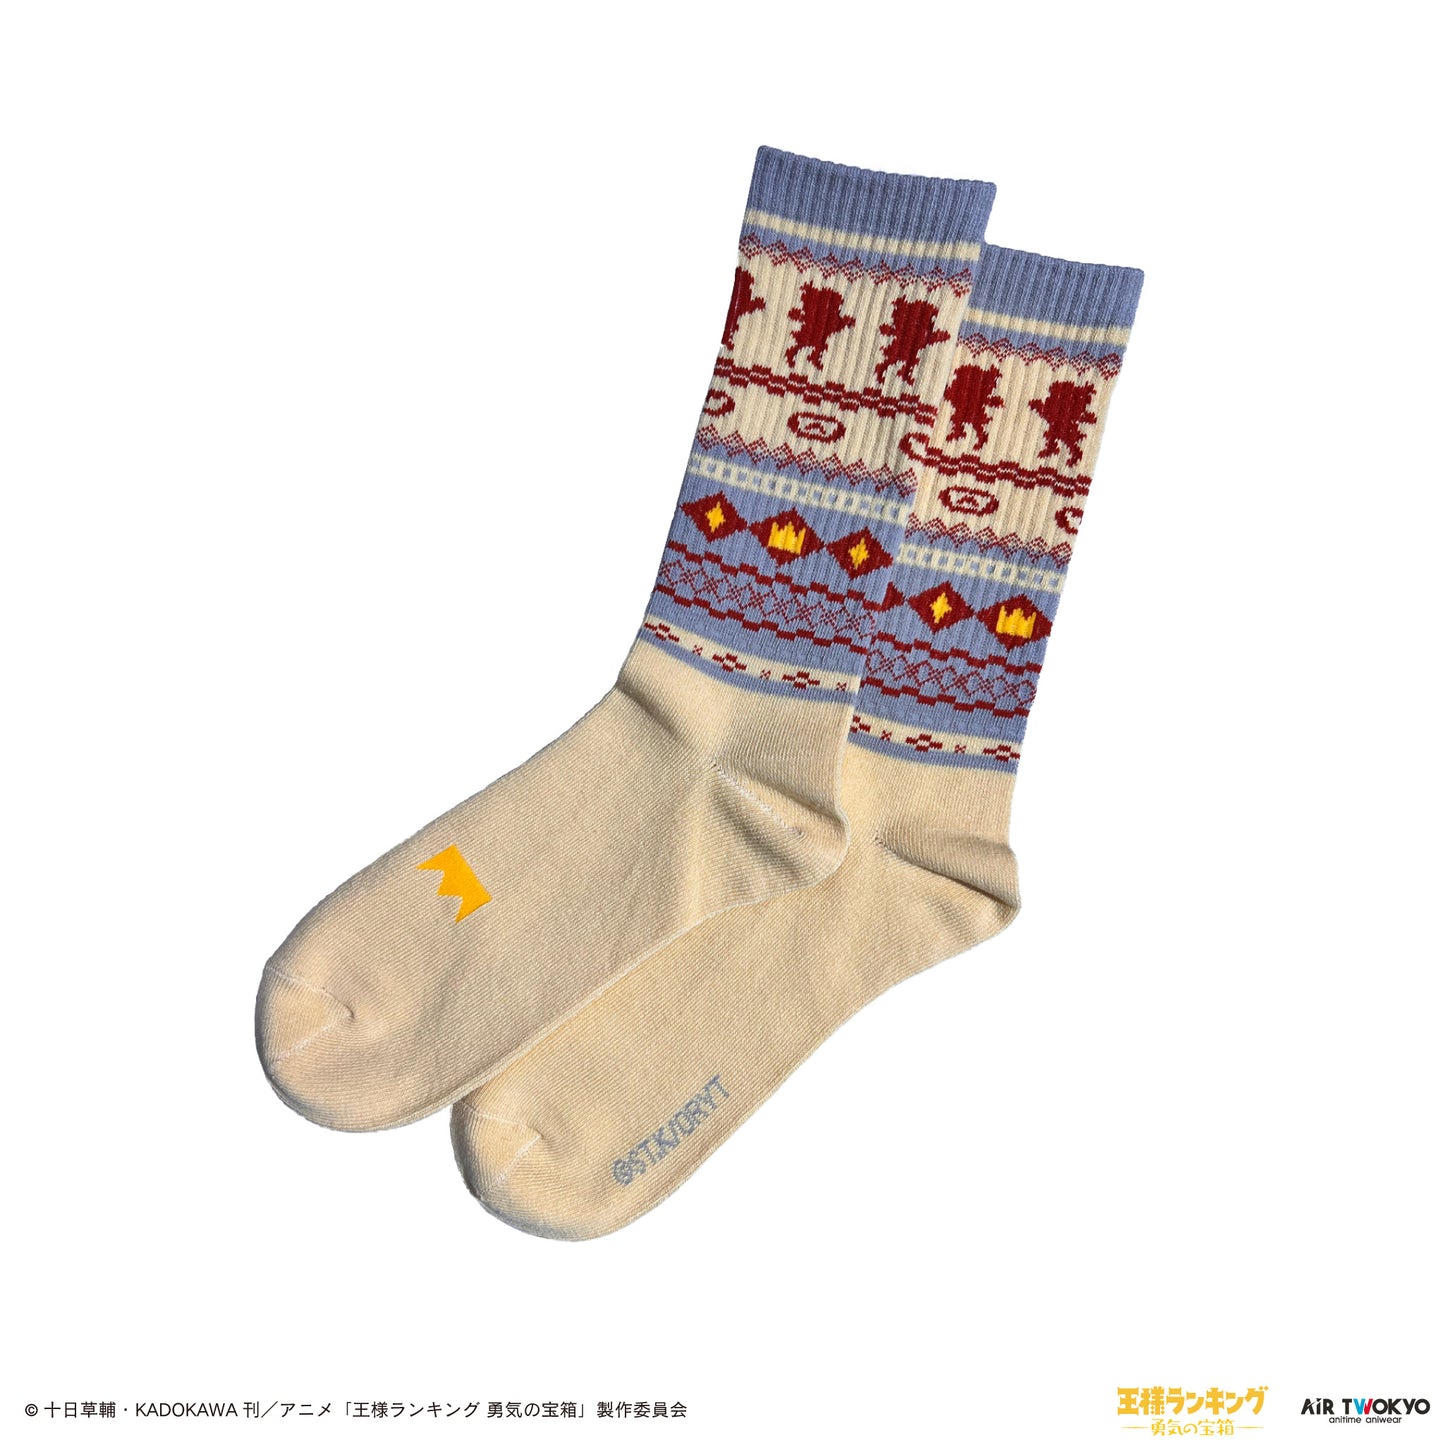 “Ranking of Kings: The Treasure Chest of Courage”character socks